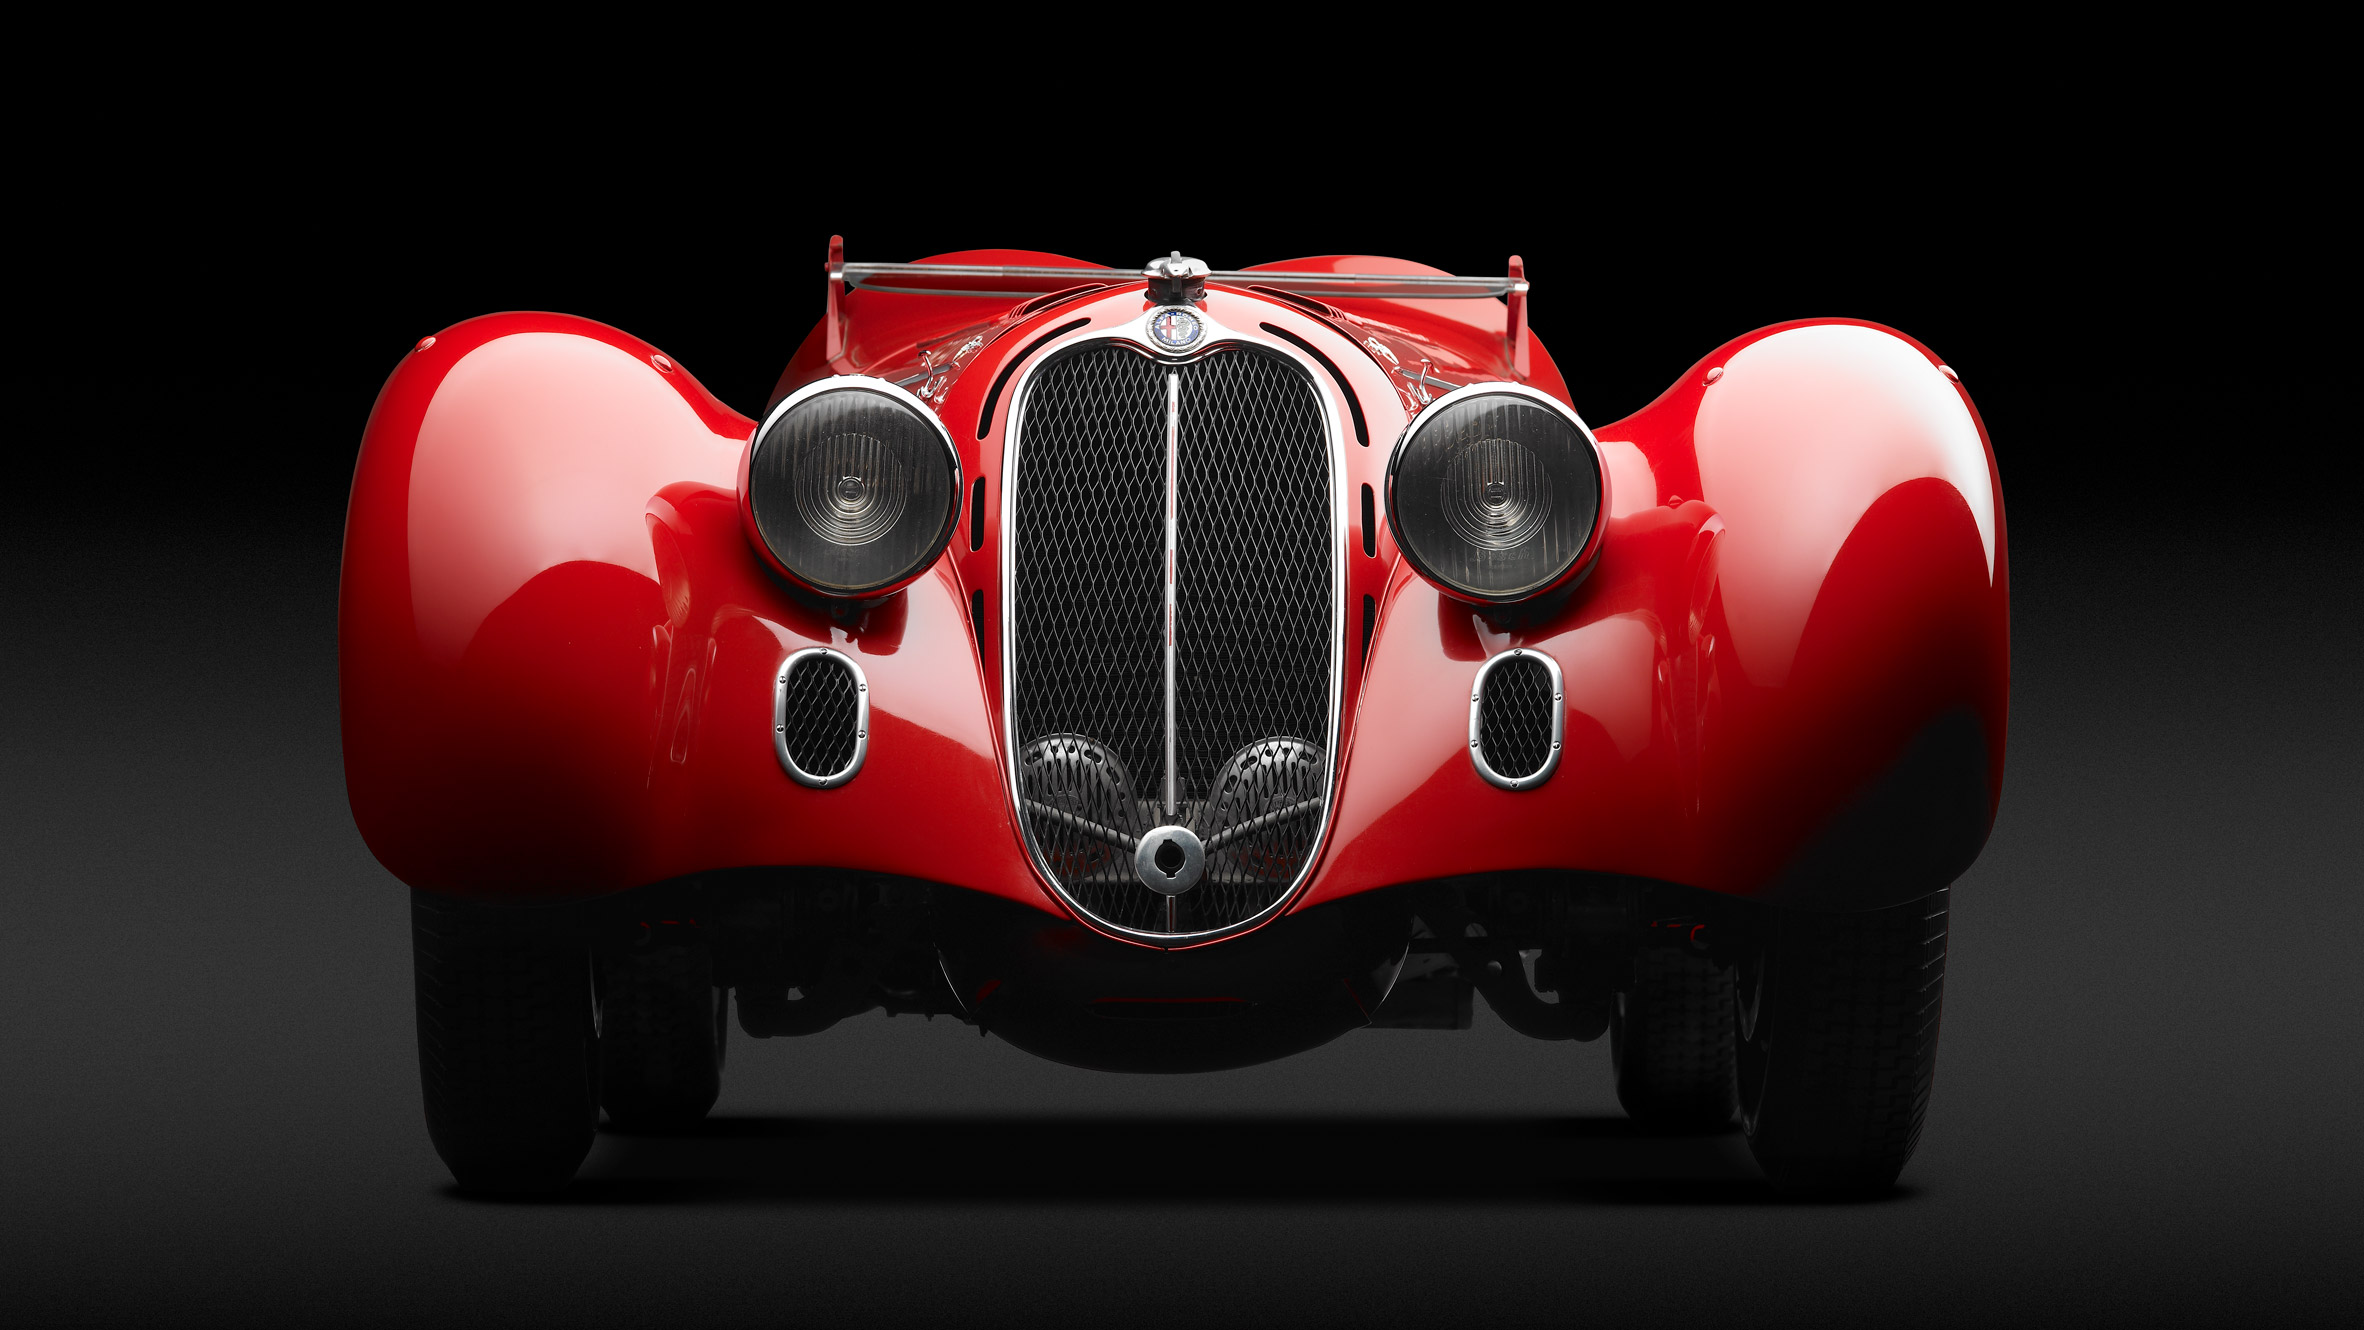 Ultimate Collector Cars shows the most desirable vintage cars of all time